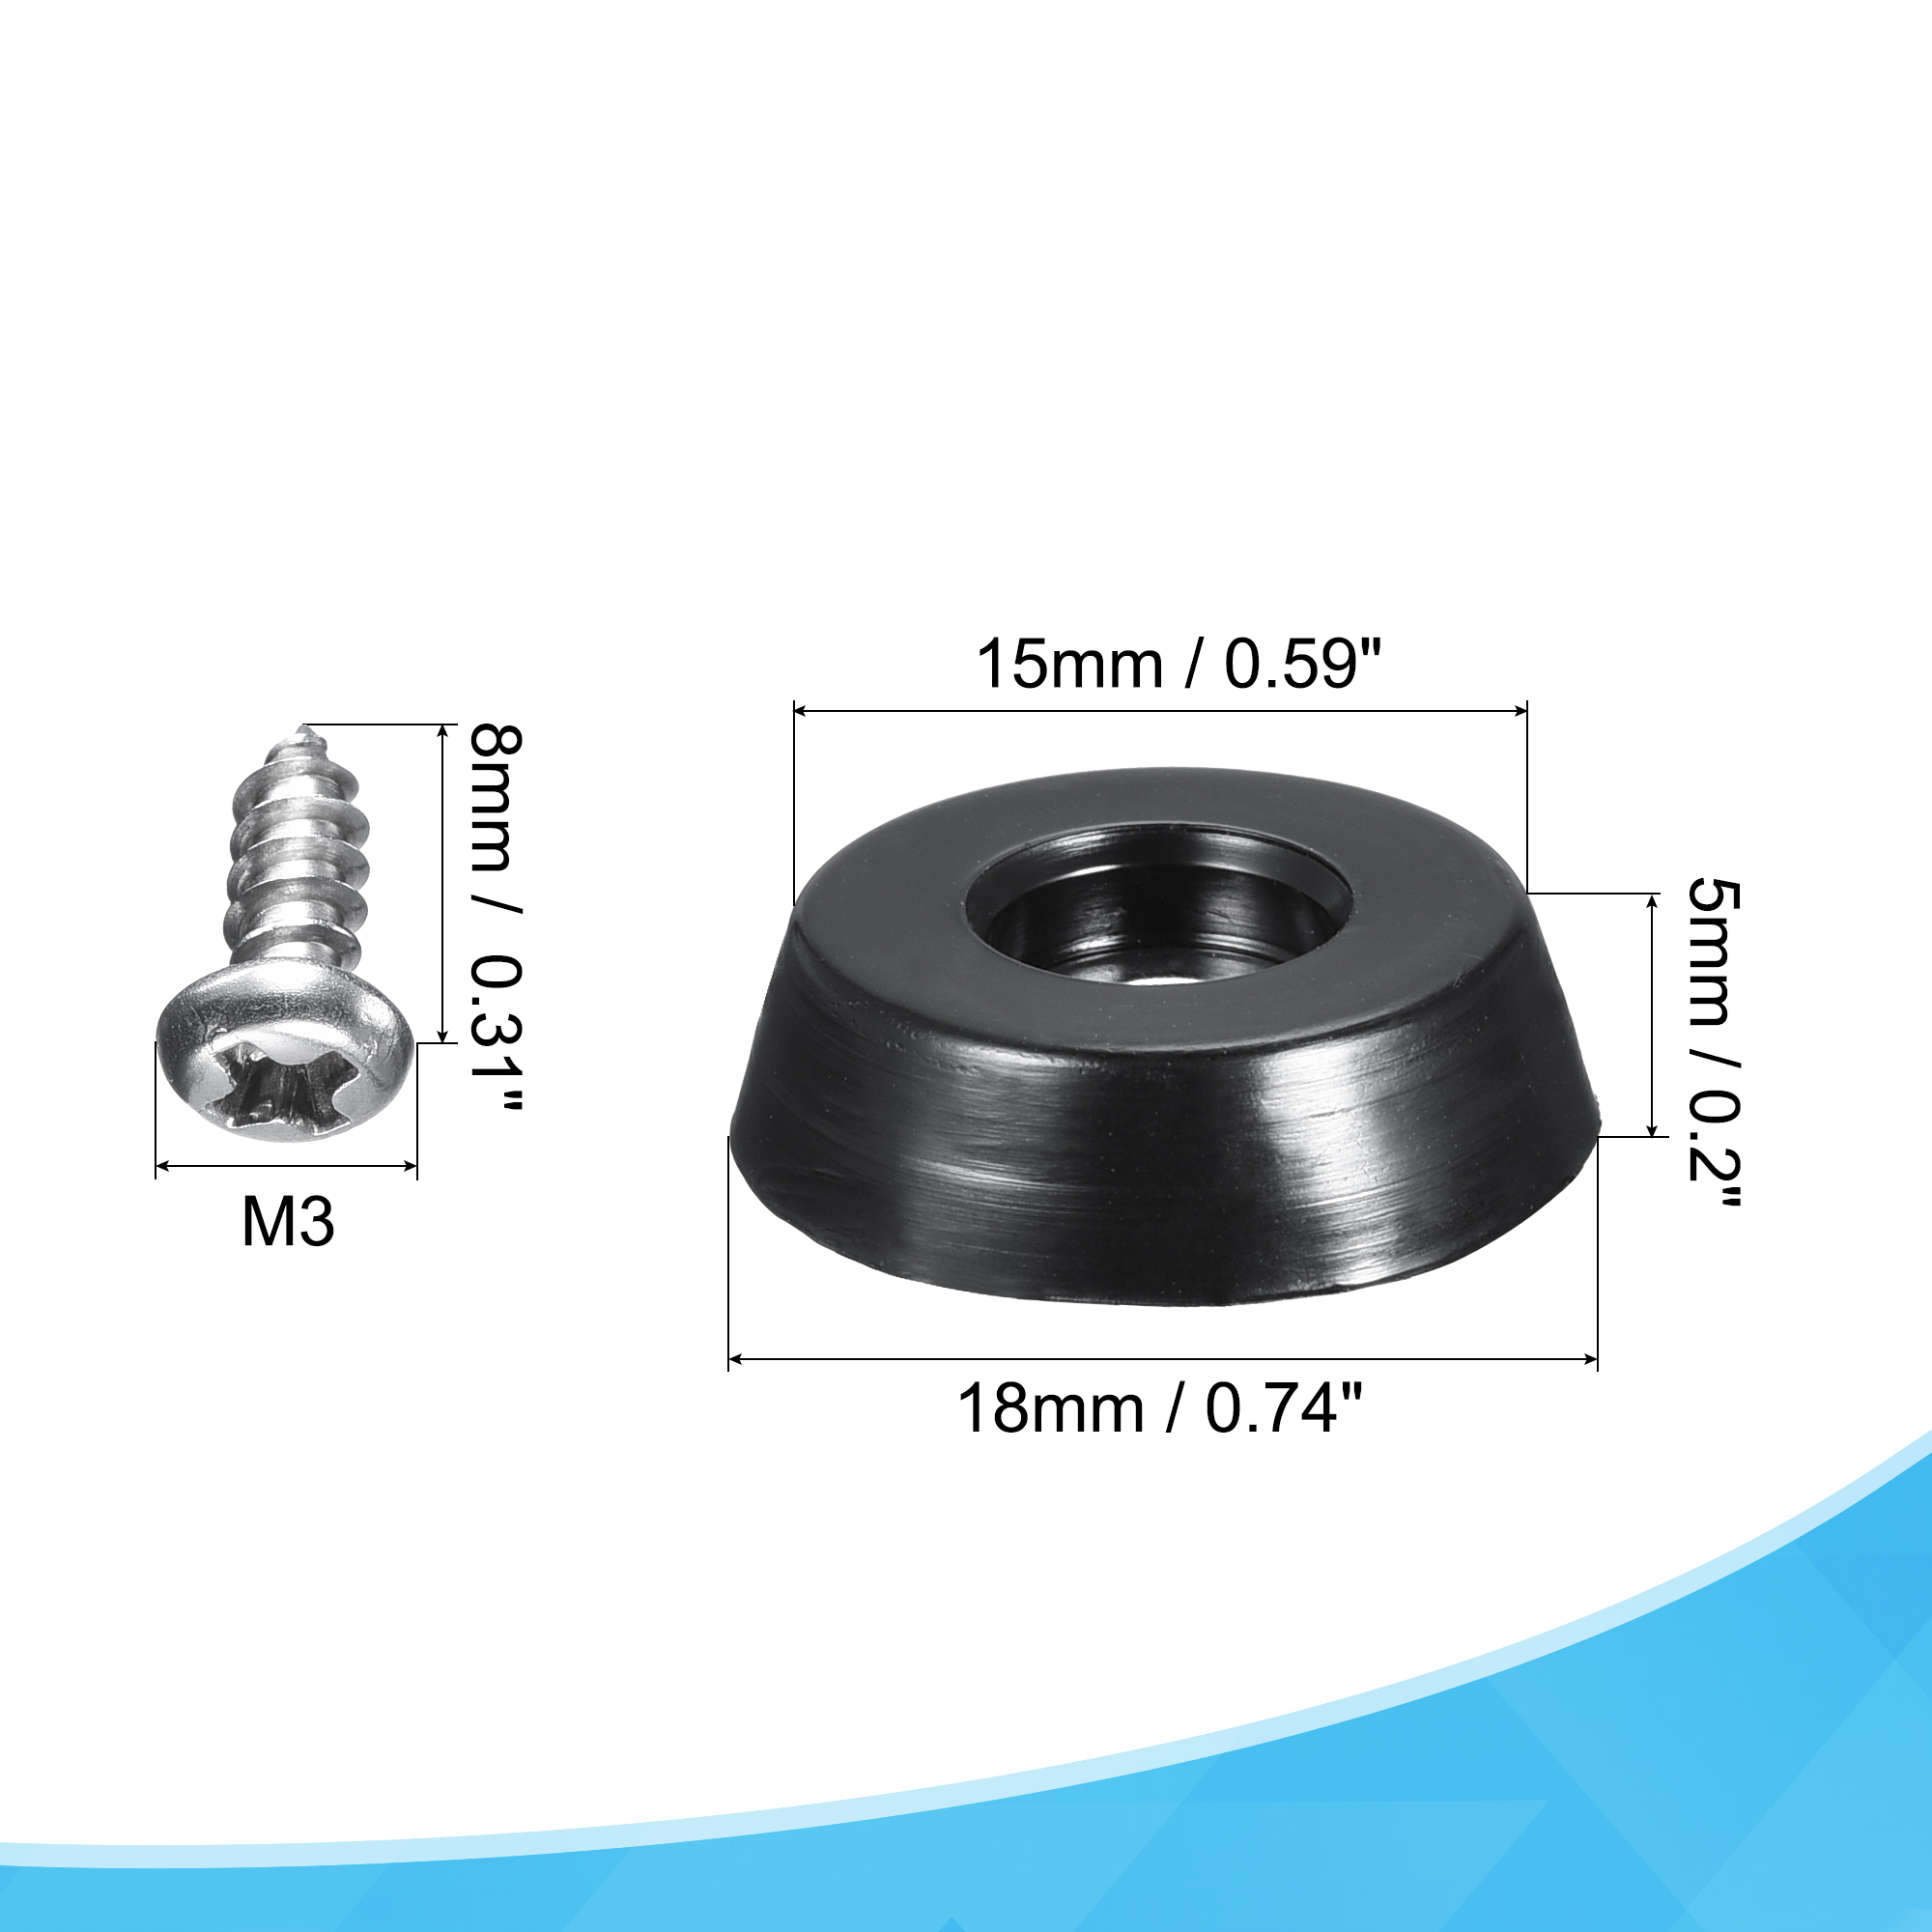 Uxcell 0.71" W x  0.2" H Rubber Bumper Feet, Stainless Steel Screws and Washer 10 Pack - image 3 of 5